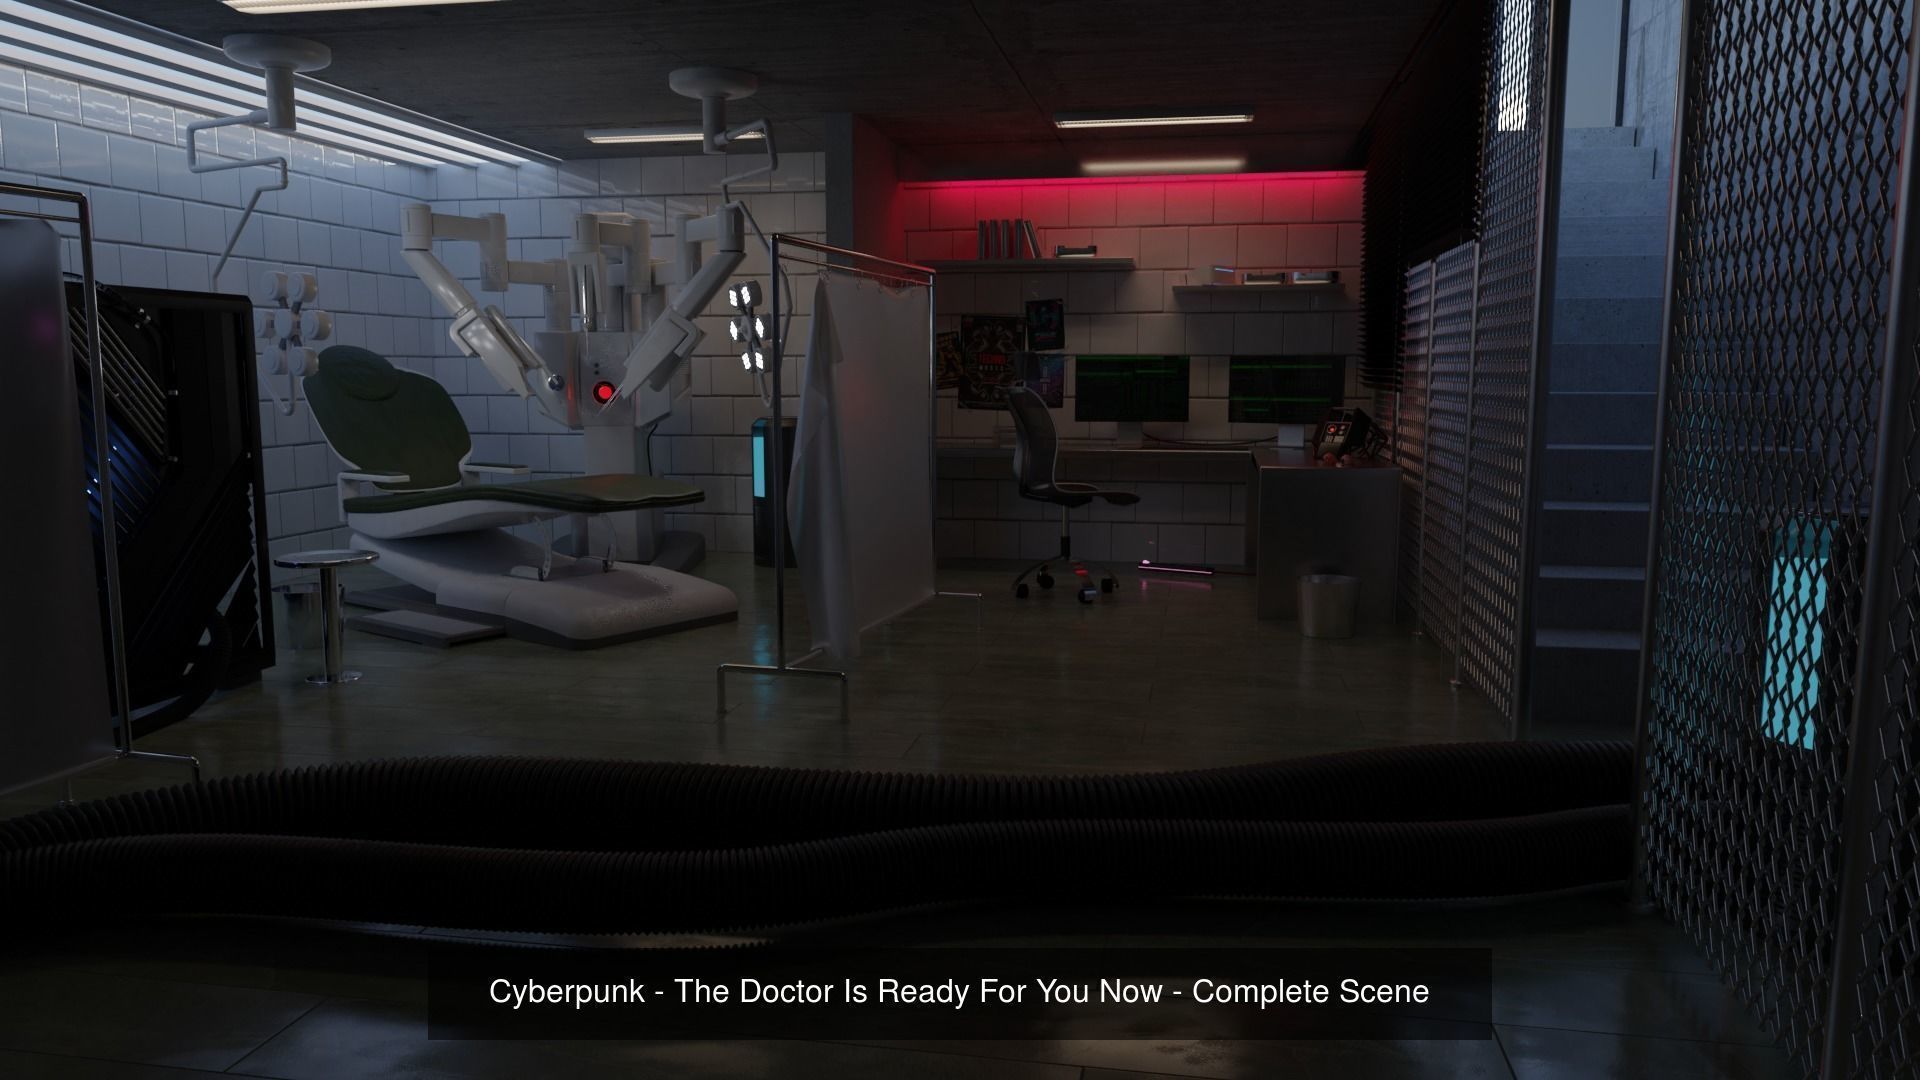 Cyberpunk - The Doctor Is Ready For You Now - Complete Scene 3D model